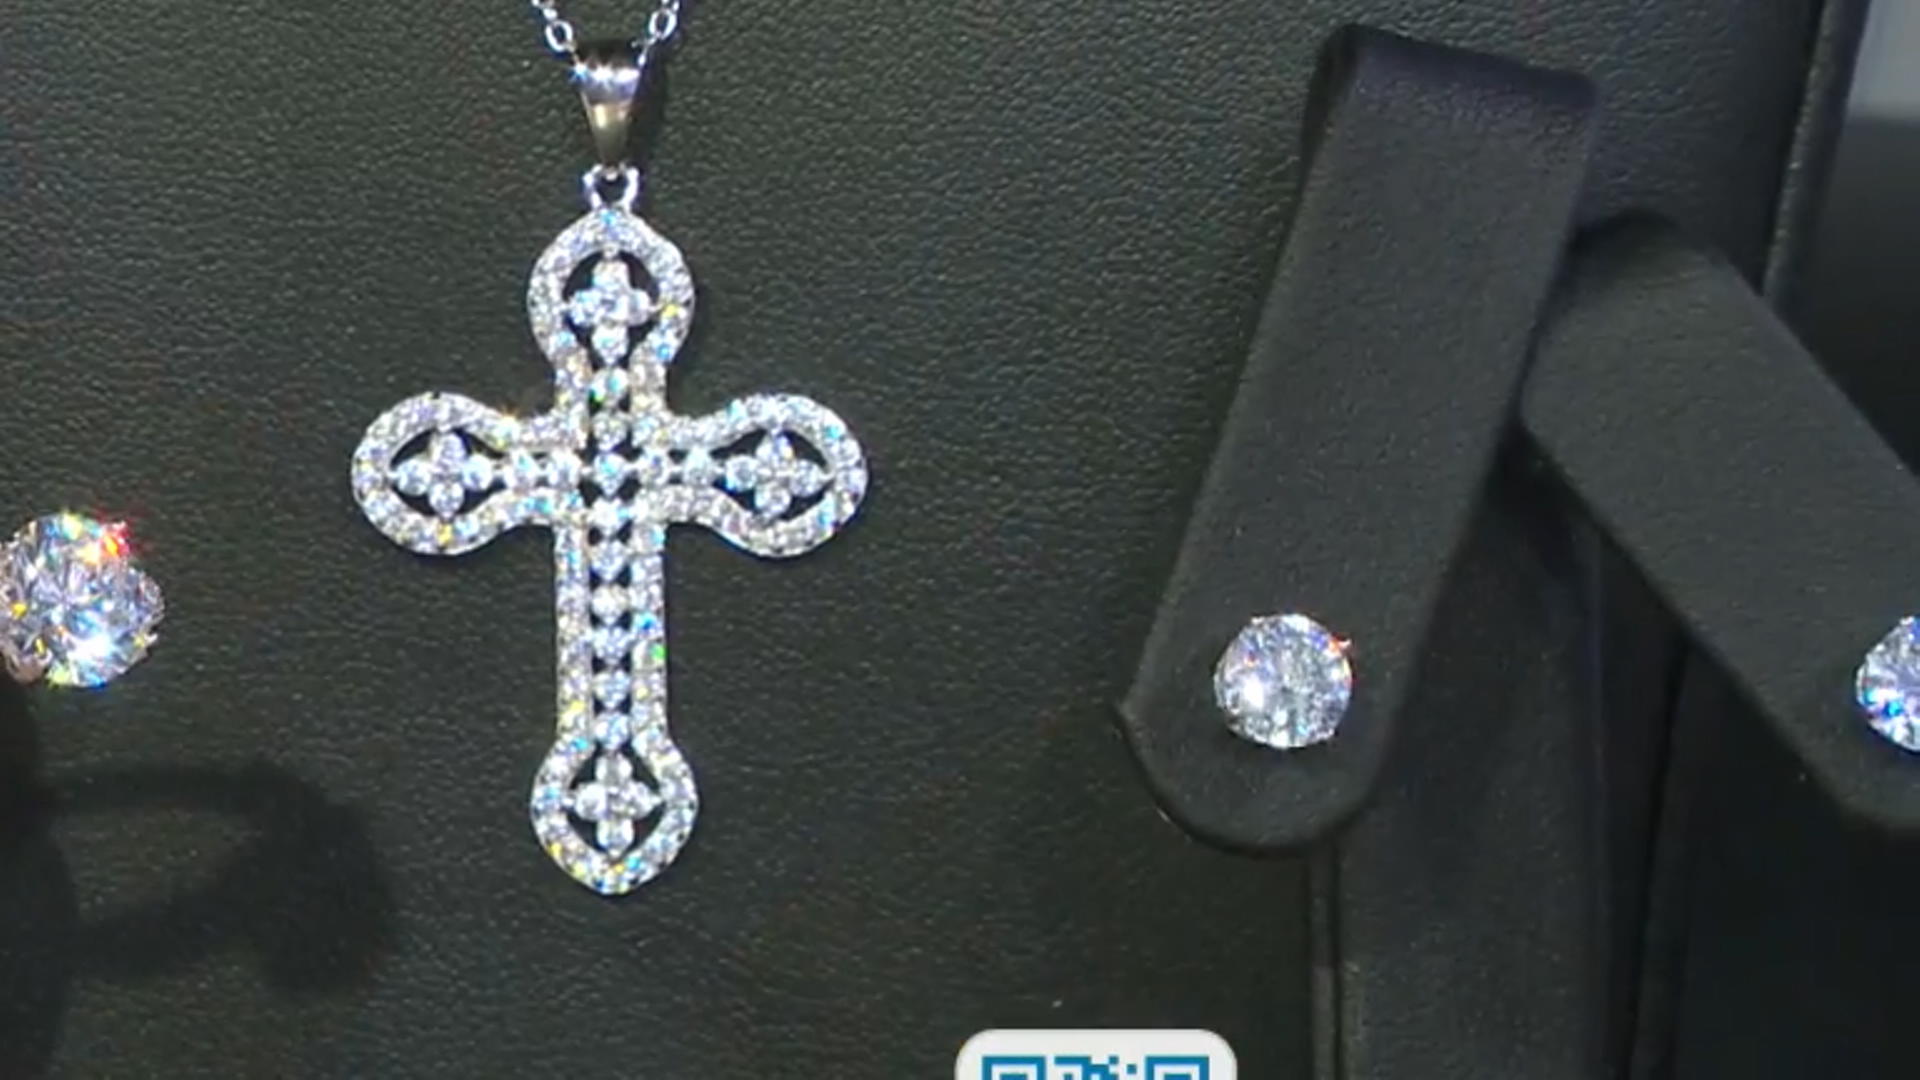 White Cubic Zirconia Rhodium Over Sterling Silver Cross Pendant With Chain 1.50ctw Video Thumbnail